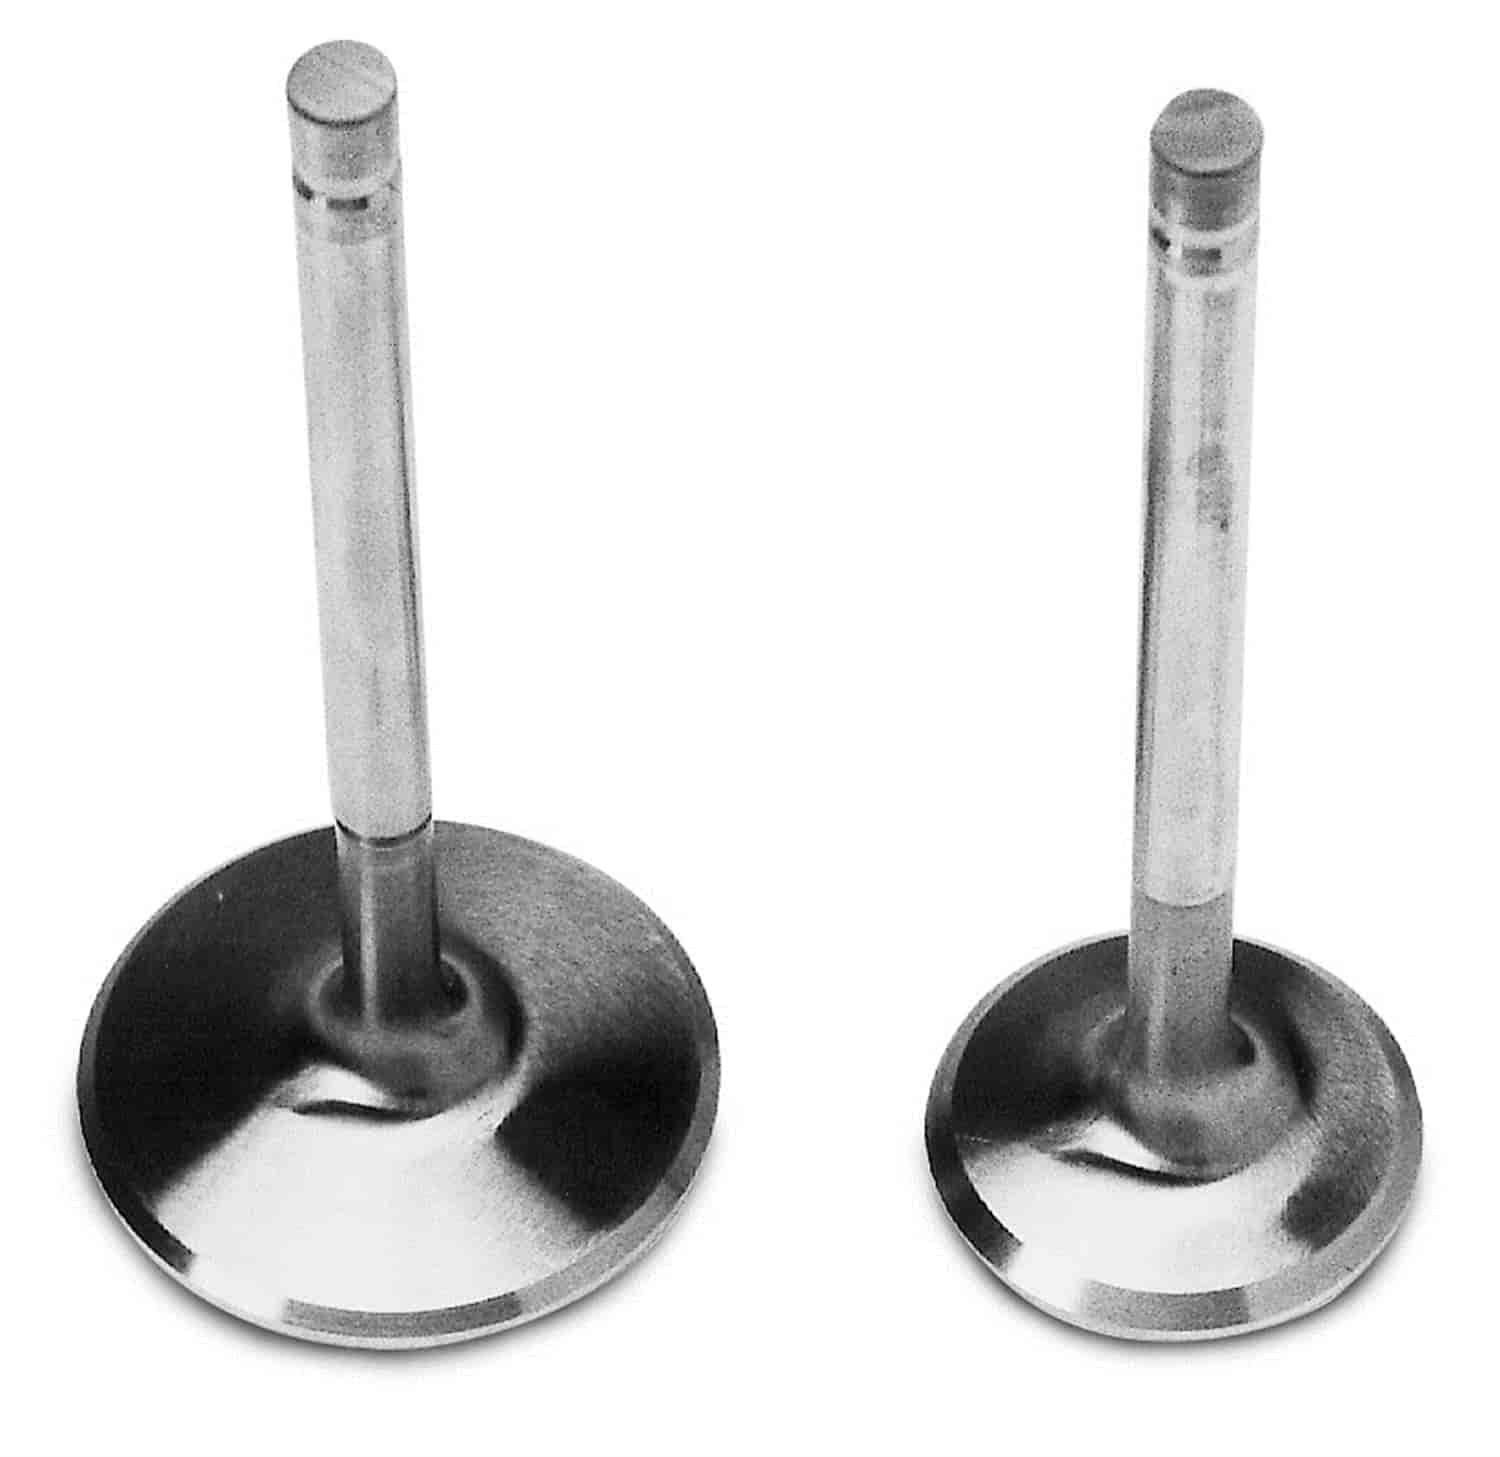 Exhaust Valve Set 1.66" for Ford FE Performer RPM Heads #350-60069 & 350-60079